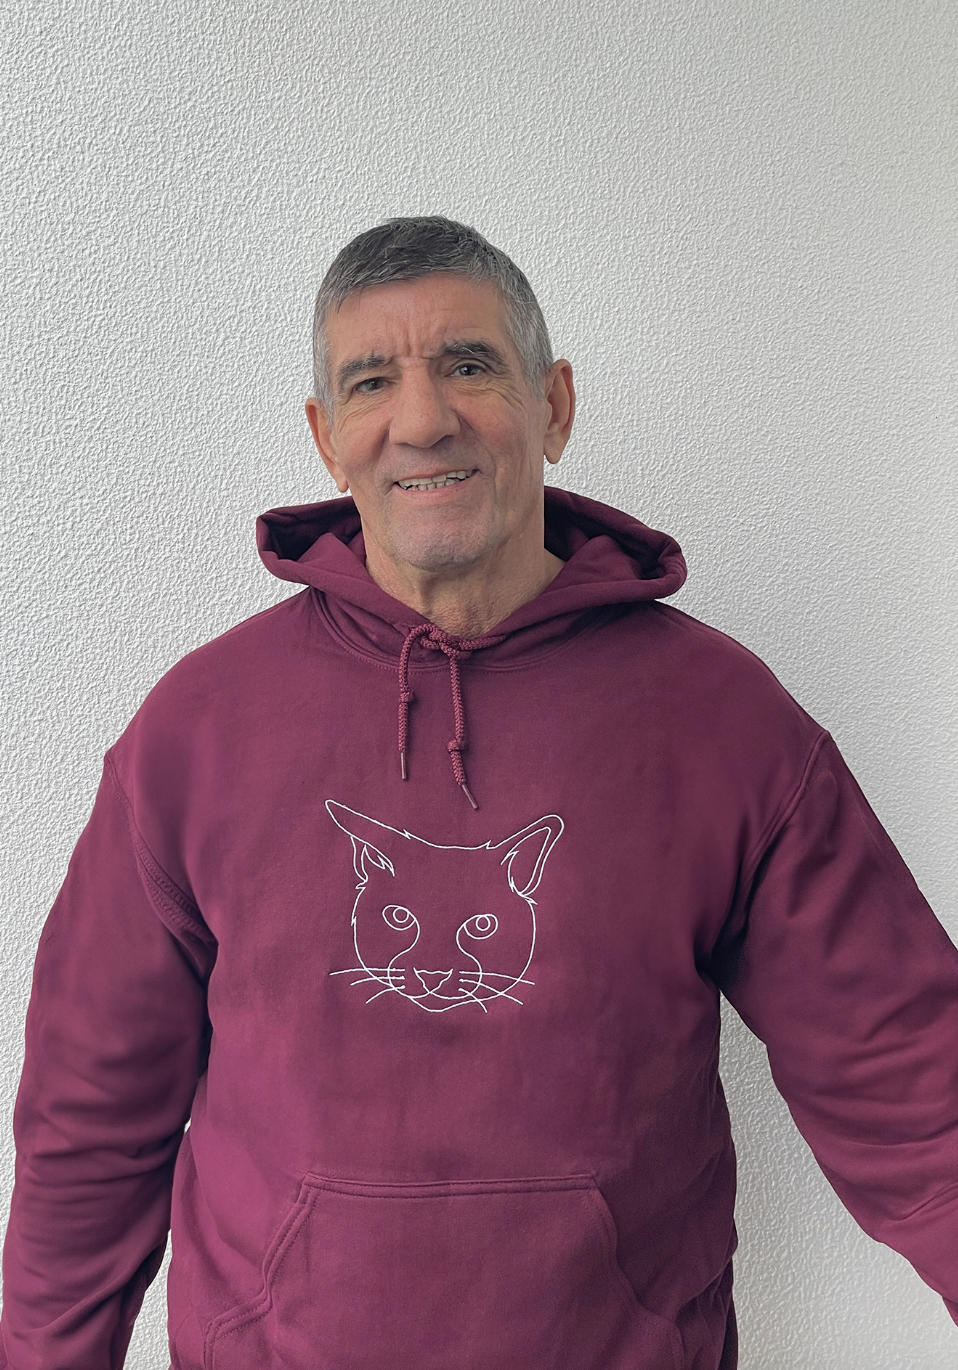 Man wearing his custom embroidered hoodie with line art of his cat.